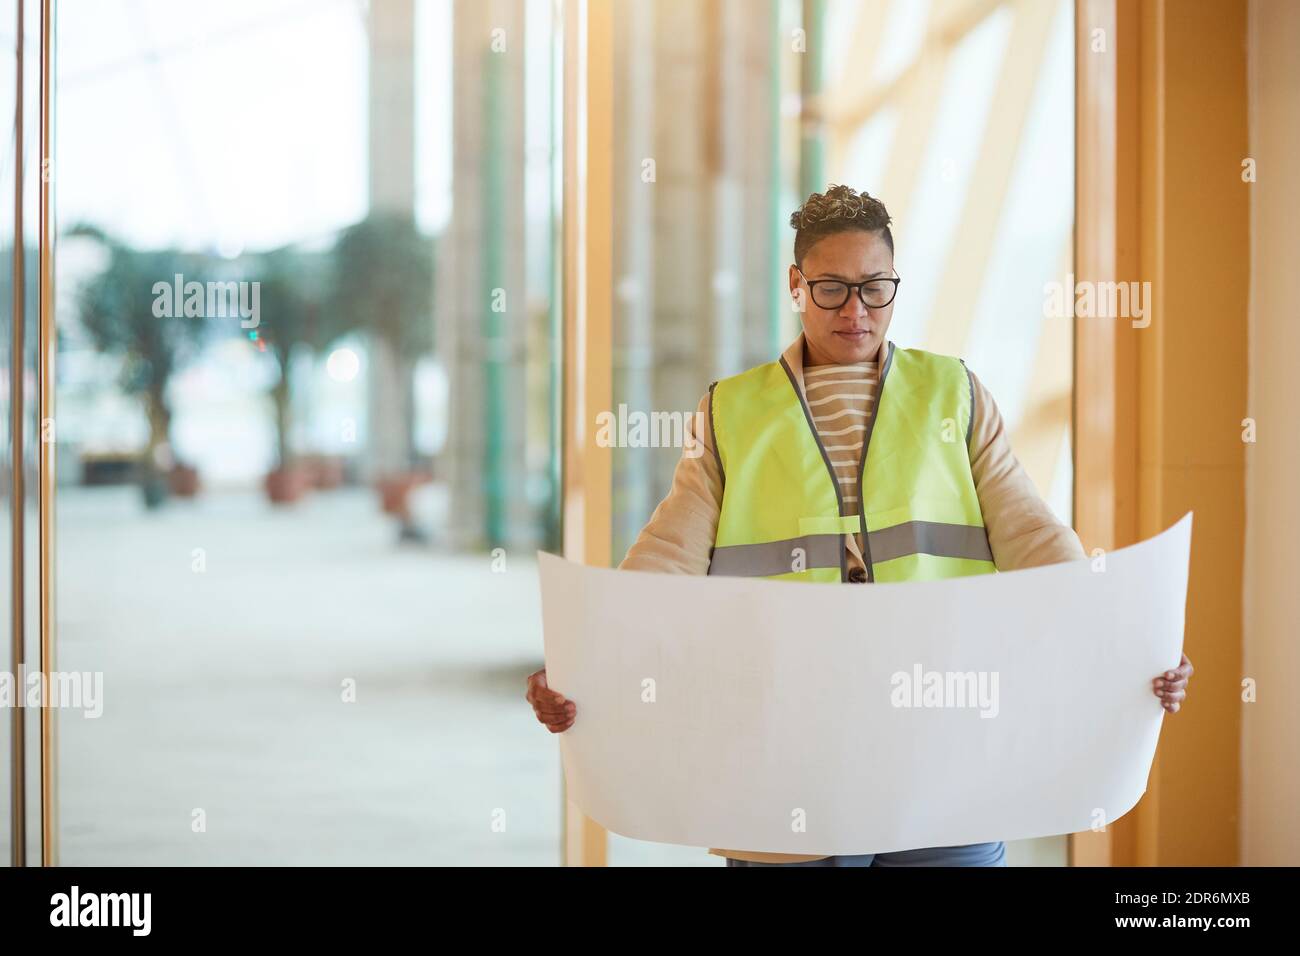 Waist up portrait of contemporary female engineer looking at blueprints while designing architectural project, copy space Stock Photo